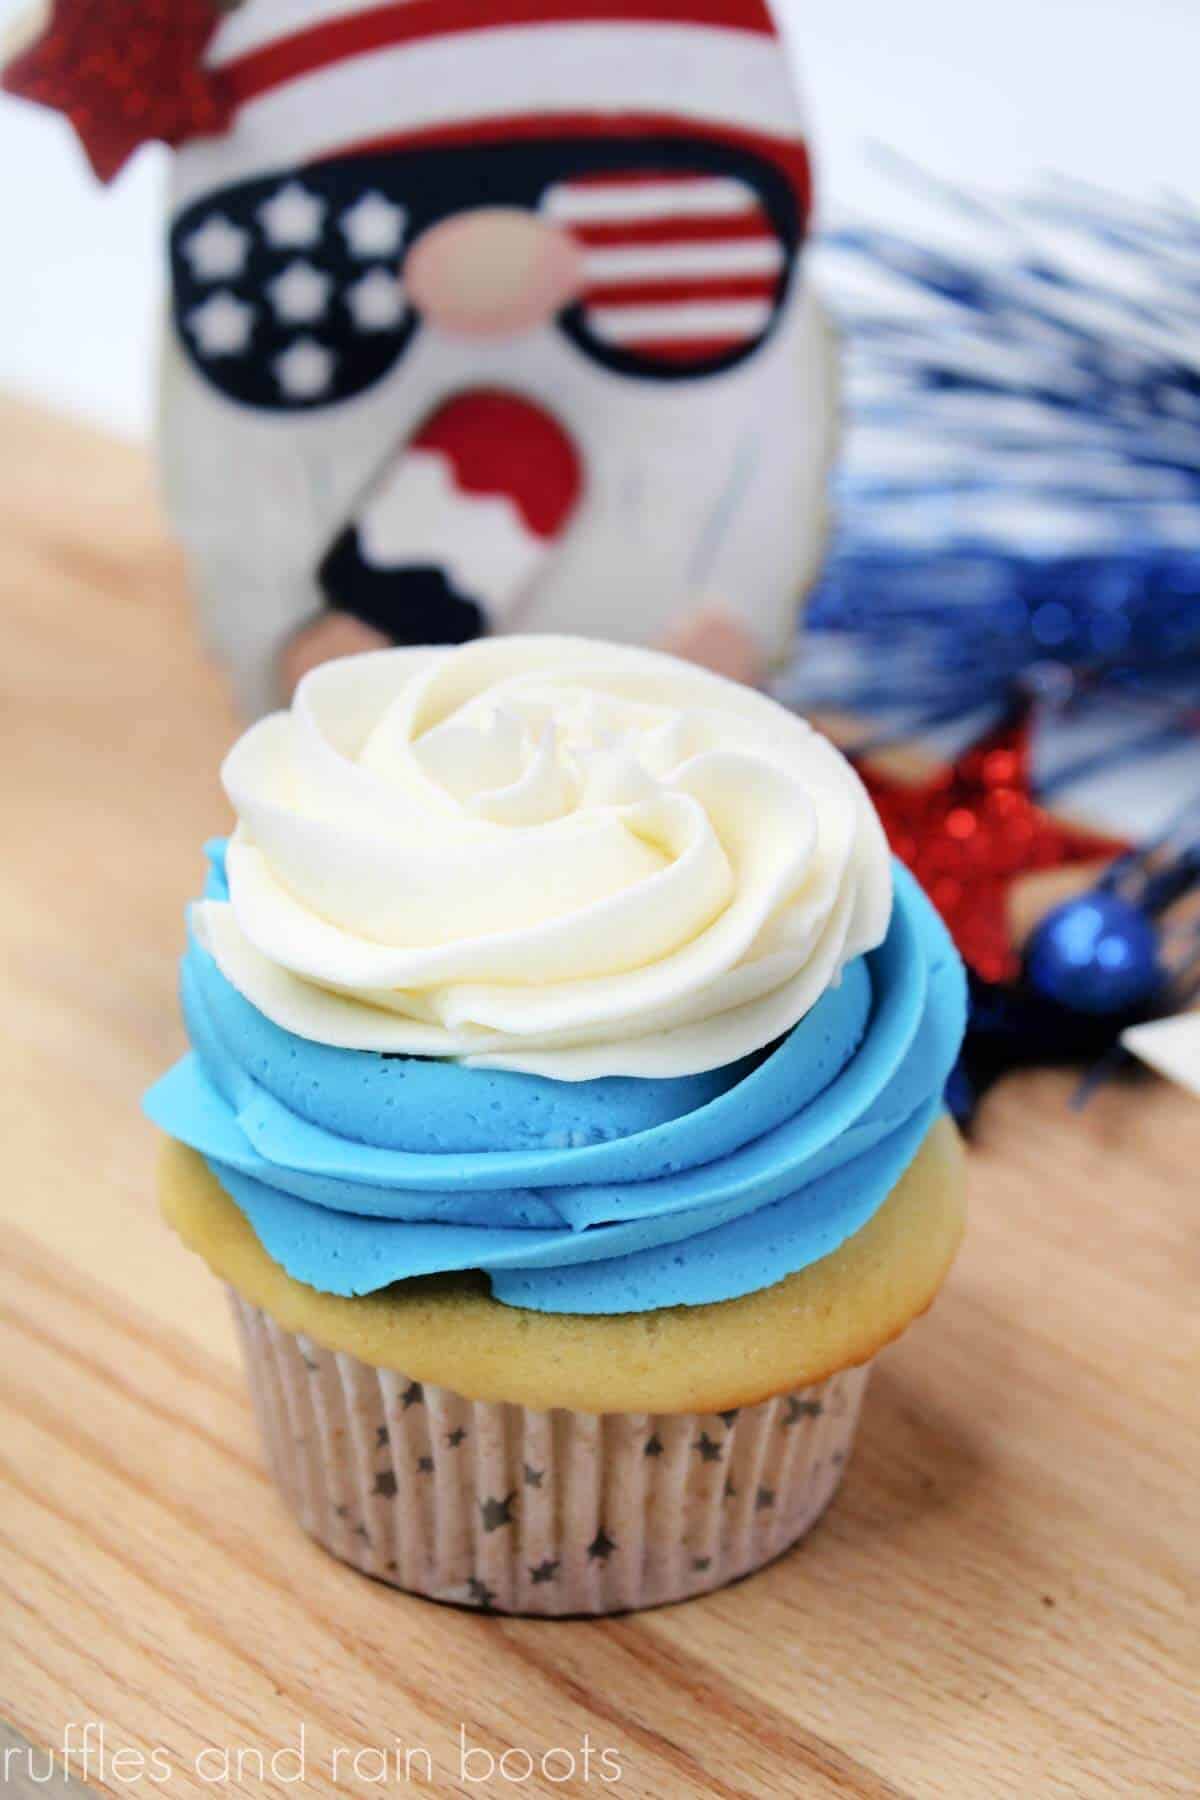 Vertical image of a two layer cupcake made with a stiff white and blue buttercream frosting recipe.